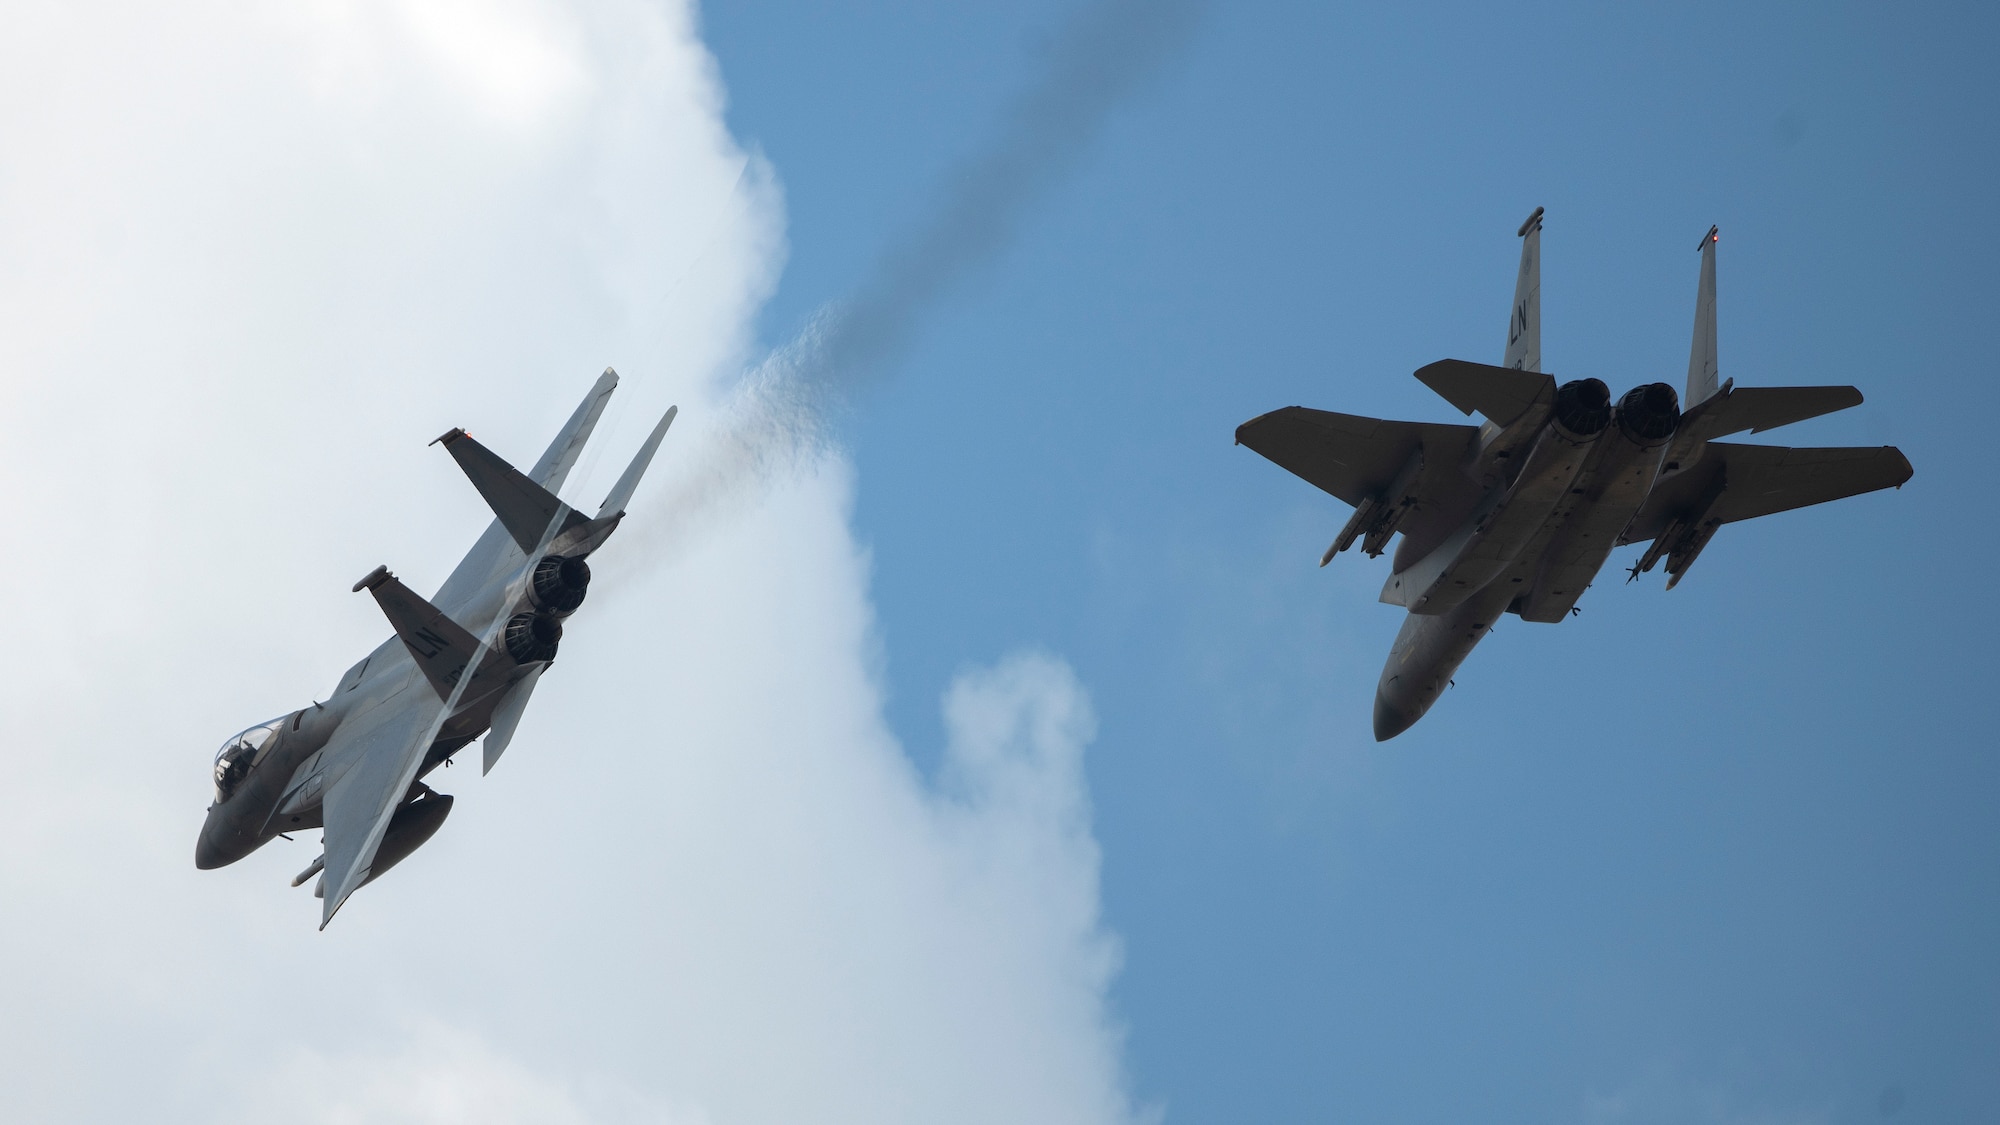 Two F-15C Eagles assigned to the 493rd Fighter Squadron fly over Royal Air Force Lakenheath, England, May 20, 2020. The 493rd FS conducts routine training to ensure the Liberty Wing brings unique air combat capabilities to the fight when called upon by U.S. Air Forces in Europe-Air Forces Africa. (U.S. Air Force photo by Airman 1st Class Jessi Monte)